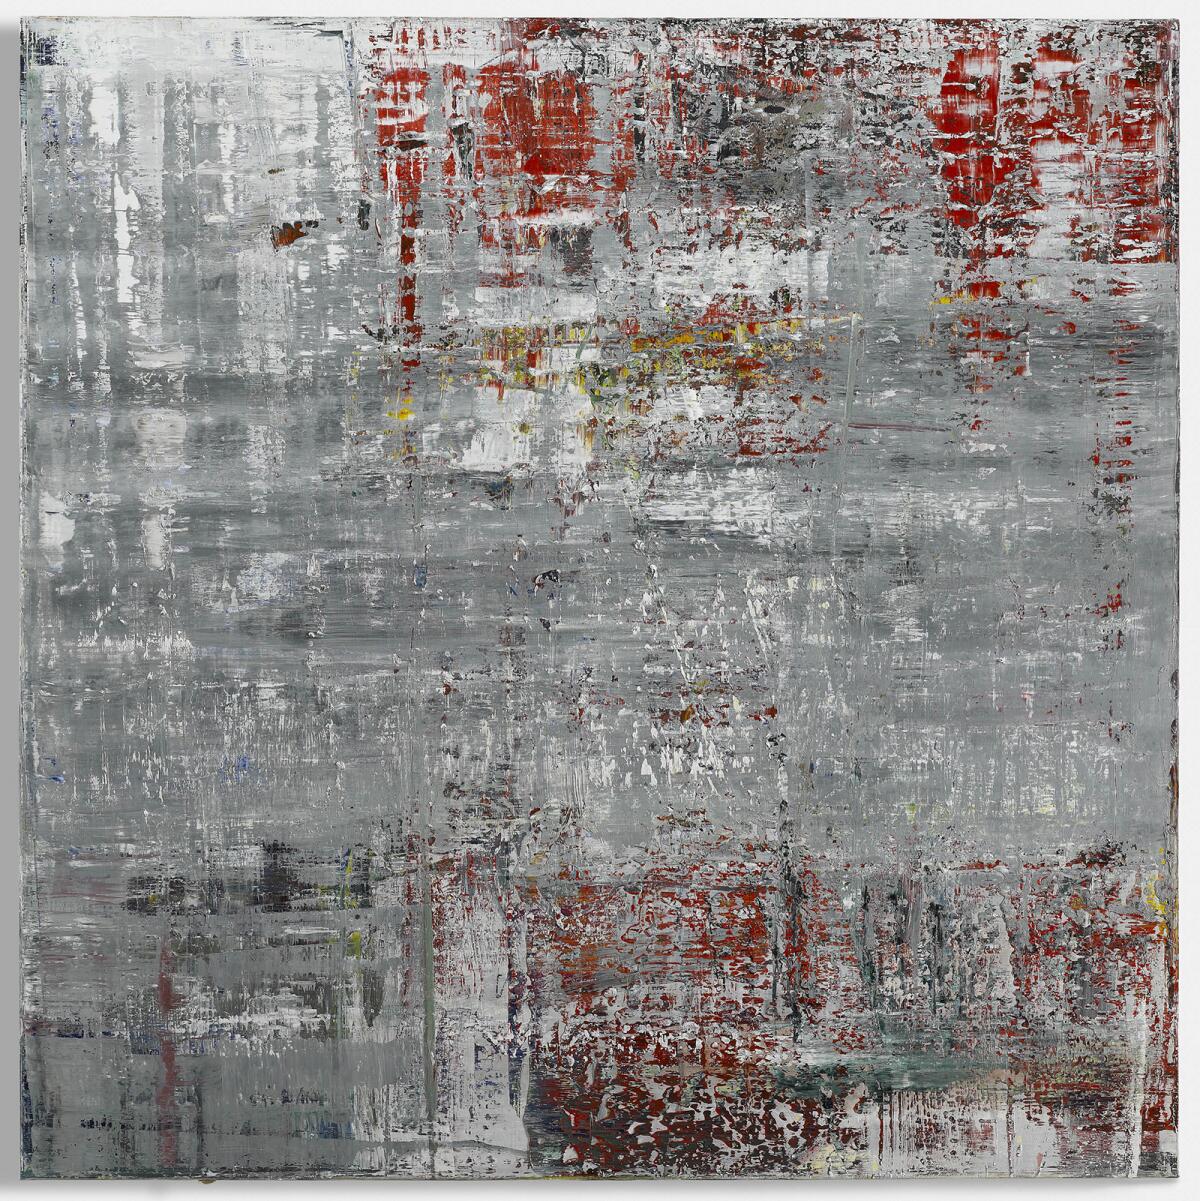 Gerhard Richter: Cage Paintings Book